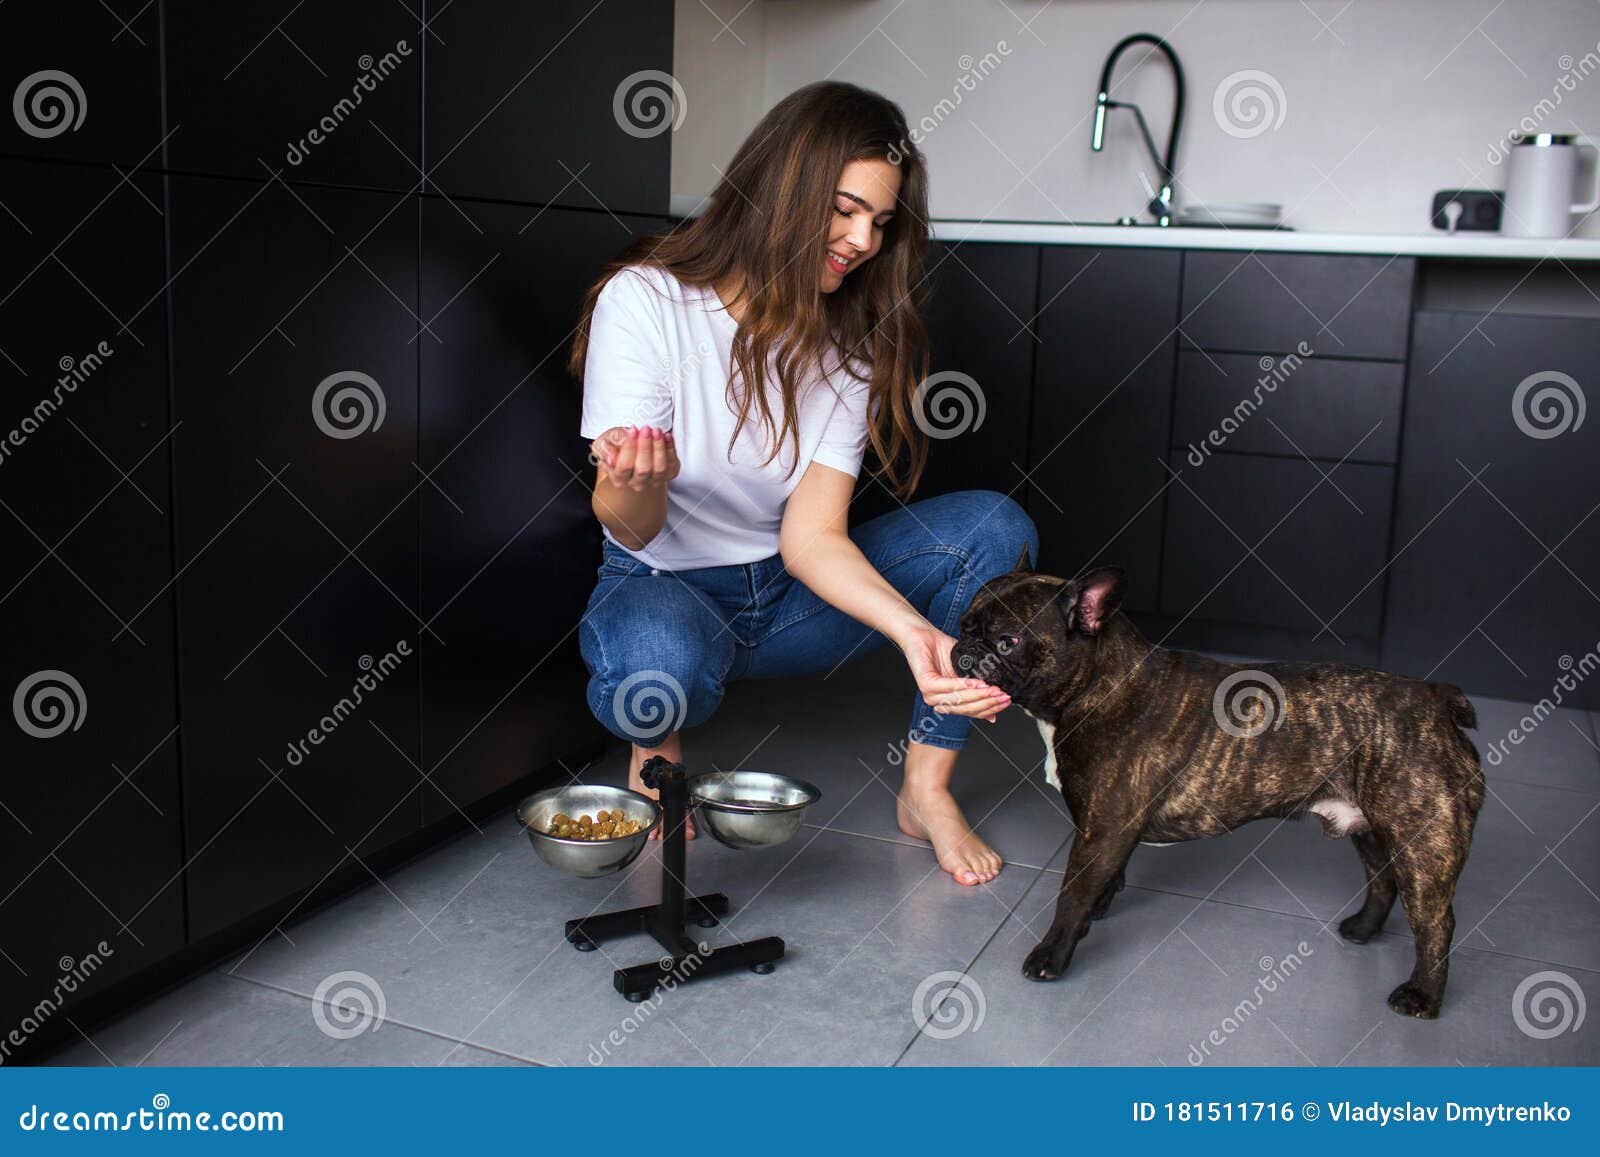 Dog by eaten girl out Discover dog